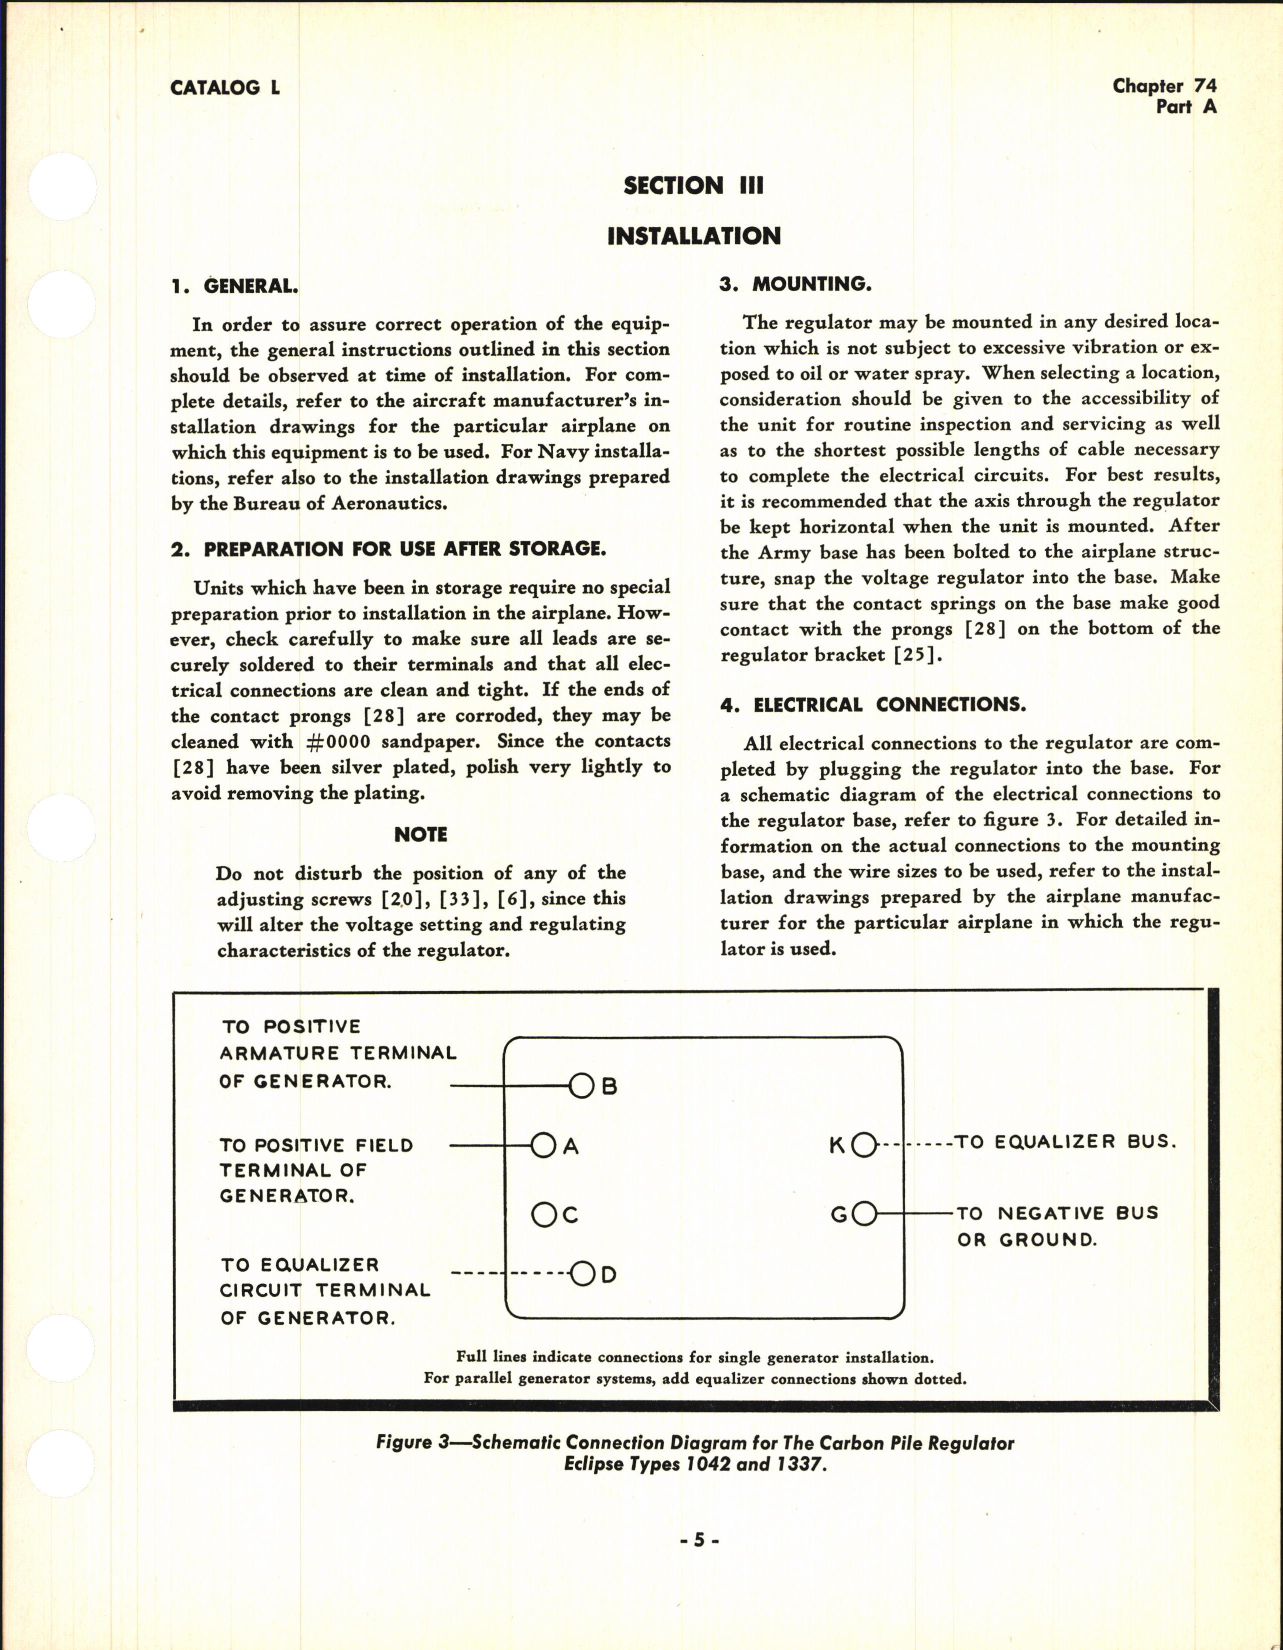 Sample page 5 from AirCorps Library document: Operating and Service Instructions for Carbon Pile Voltage Regulator Types 1042 and 1337